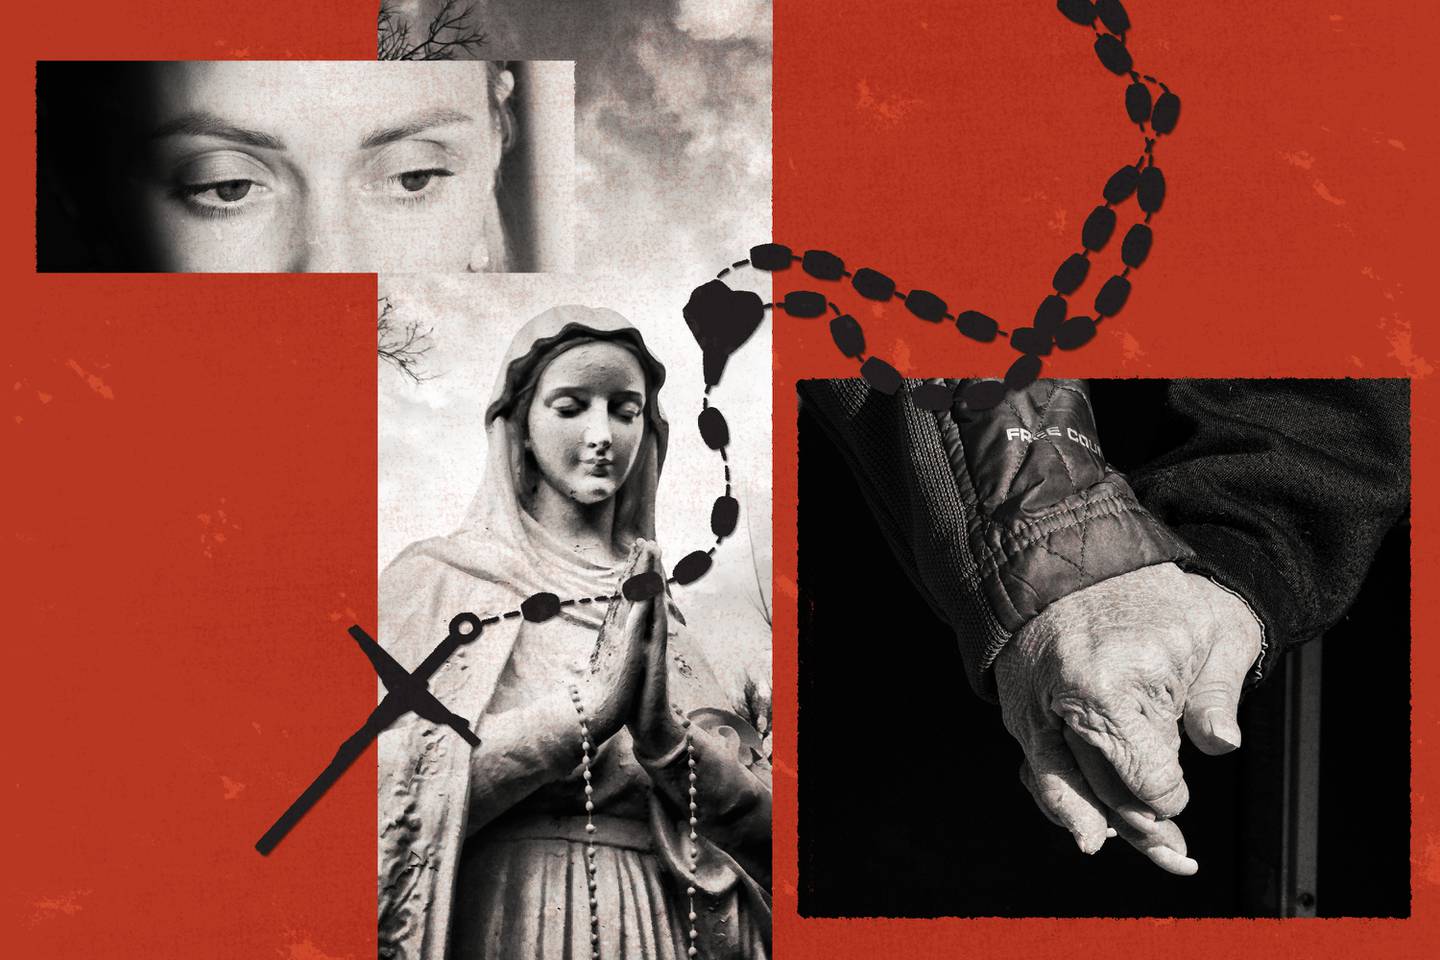 Photo collage showing cropped photographs of a woman’s eyes, statue of the Virgin Mary, and two elderly hands holding one another, with a red background and the silhouette of a rosary and crucifix layered on top.